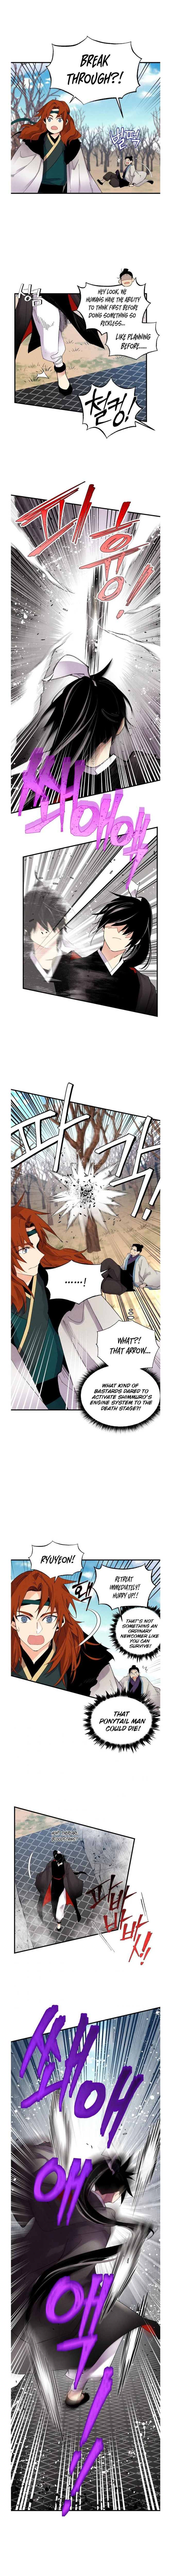 Lightning Degree - Chapter 76 Page 7